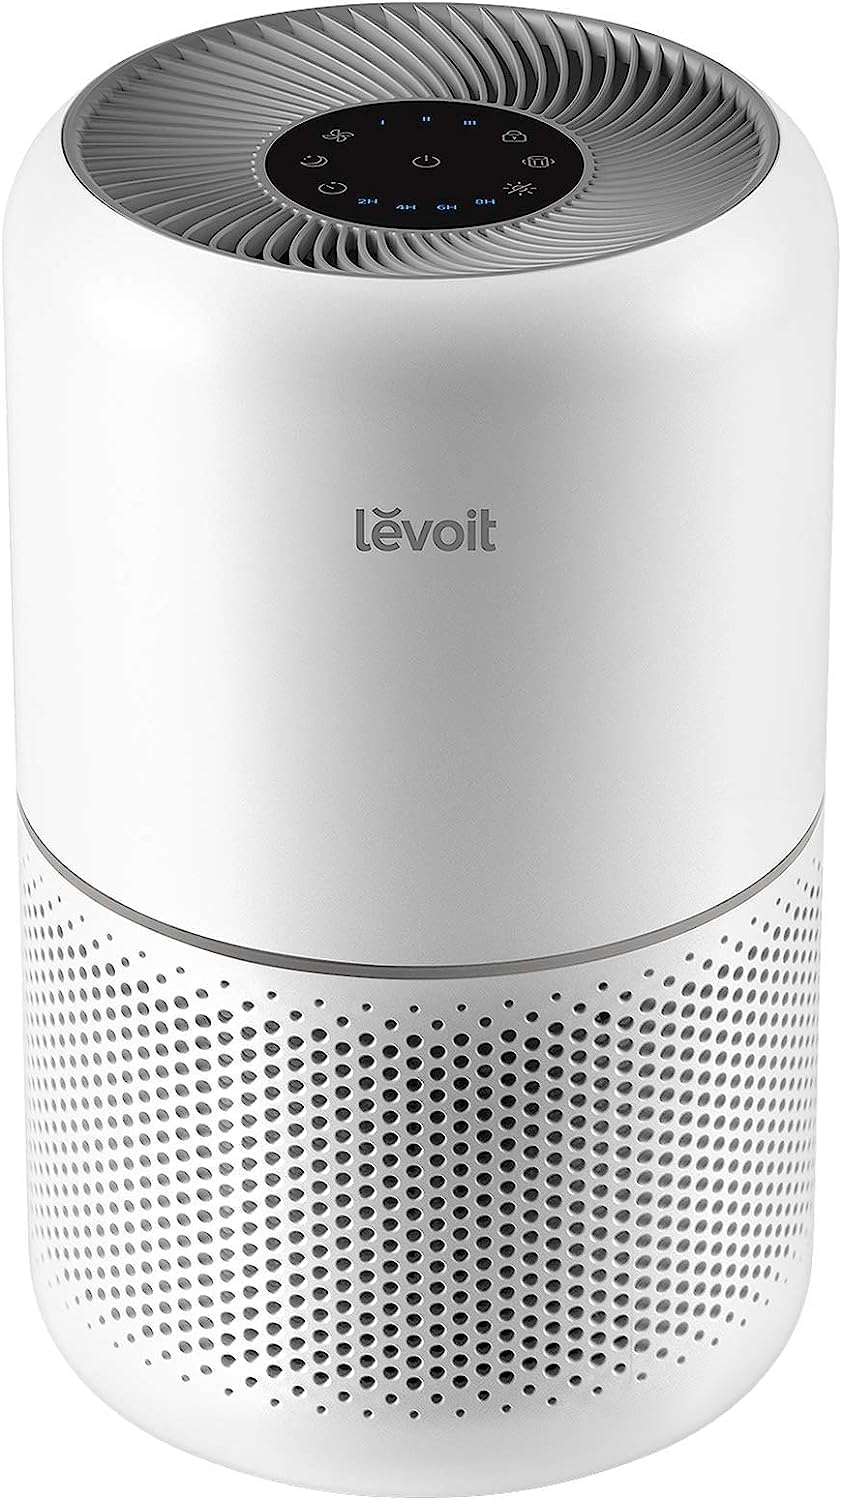 LEVOIT Air Purifier for Home Allergies Pets Hair in Bedroom, Covers Up to 1095 ft by 45W High Torque Motor, 3-in-1 Filter with HEPA sleep mode, Remove Dust Smoke Pollutants Odor, Core300-P, White